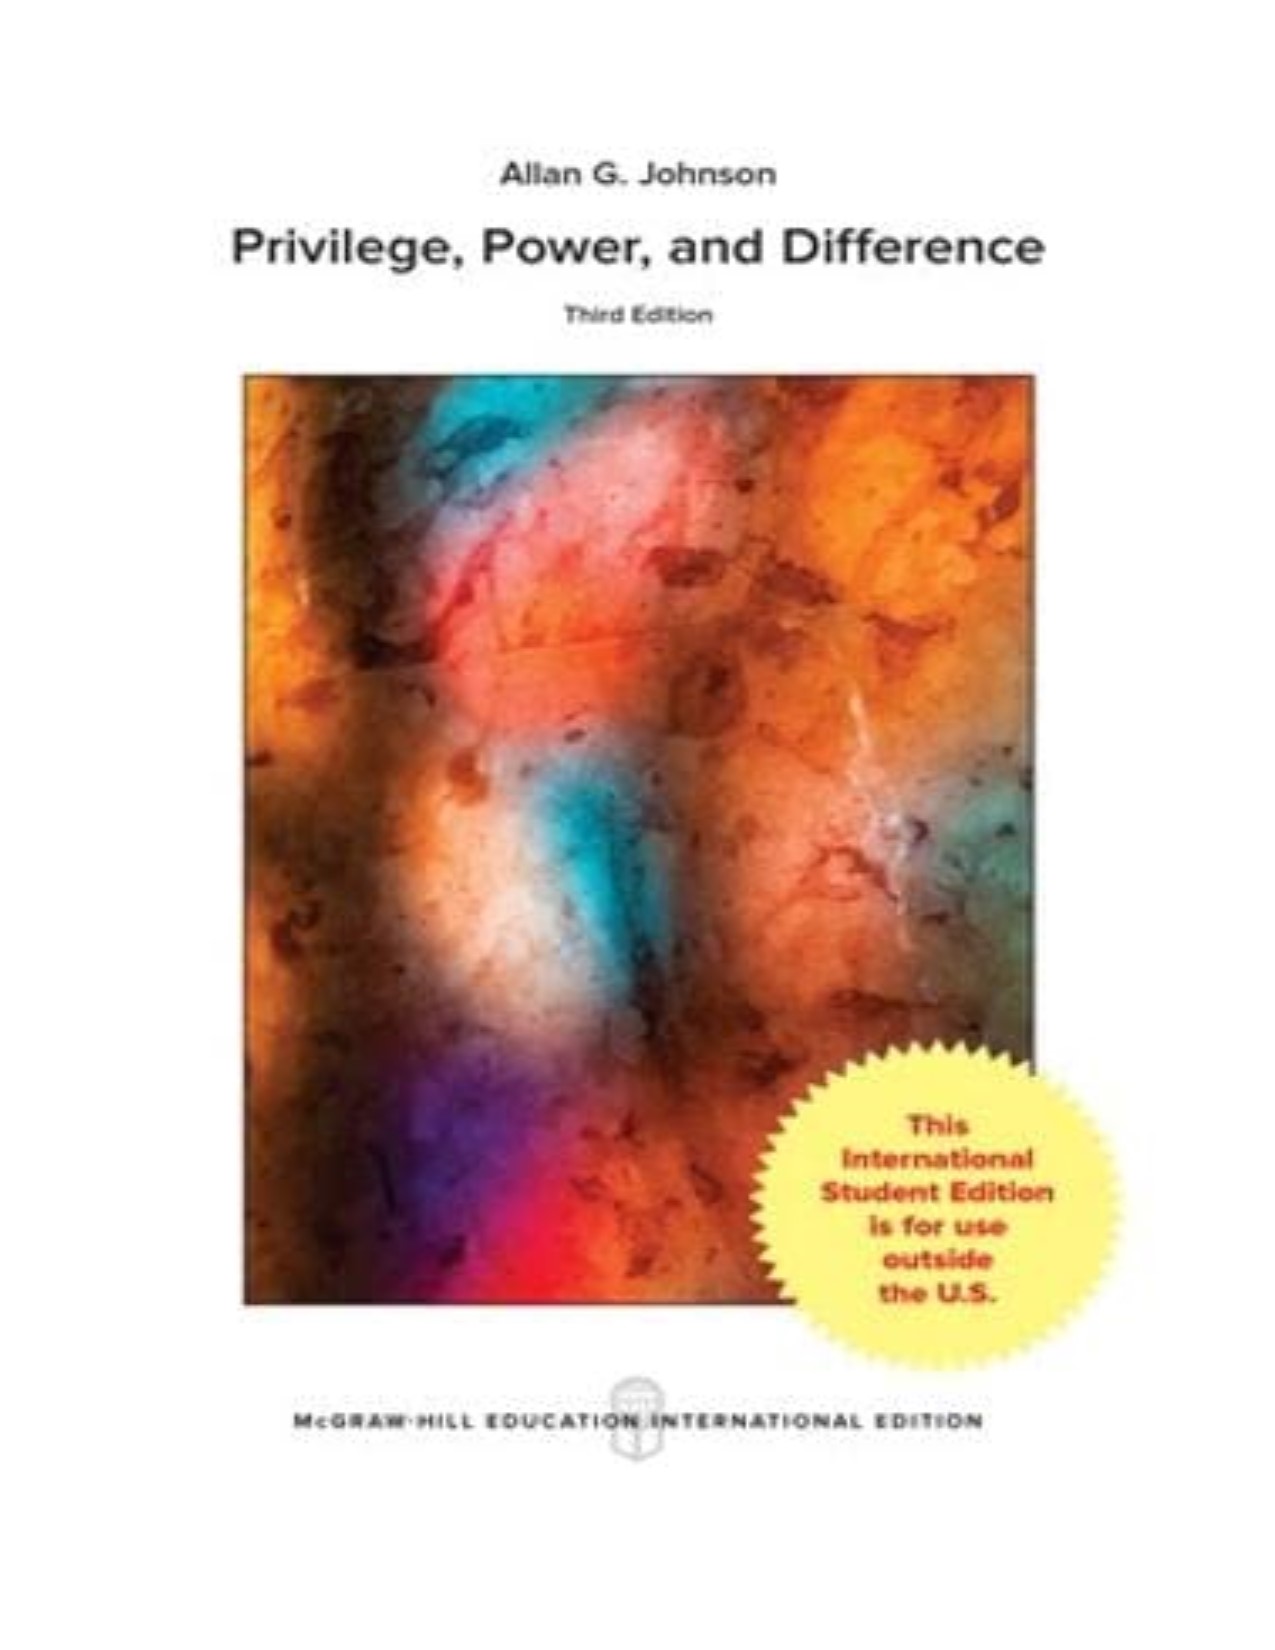 Privilege, power, and difference